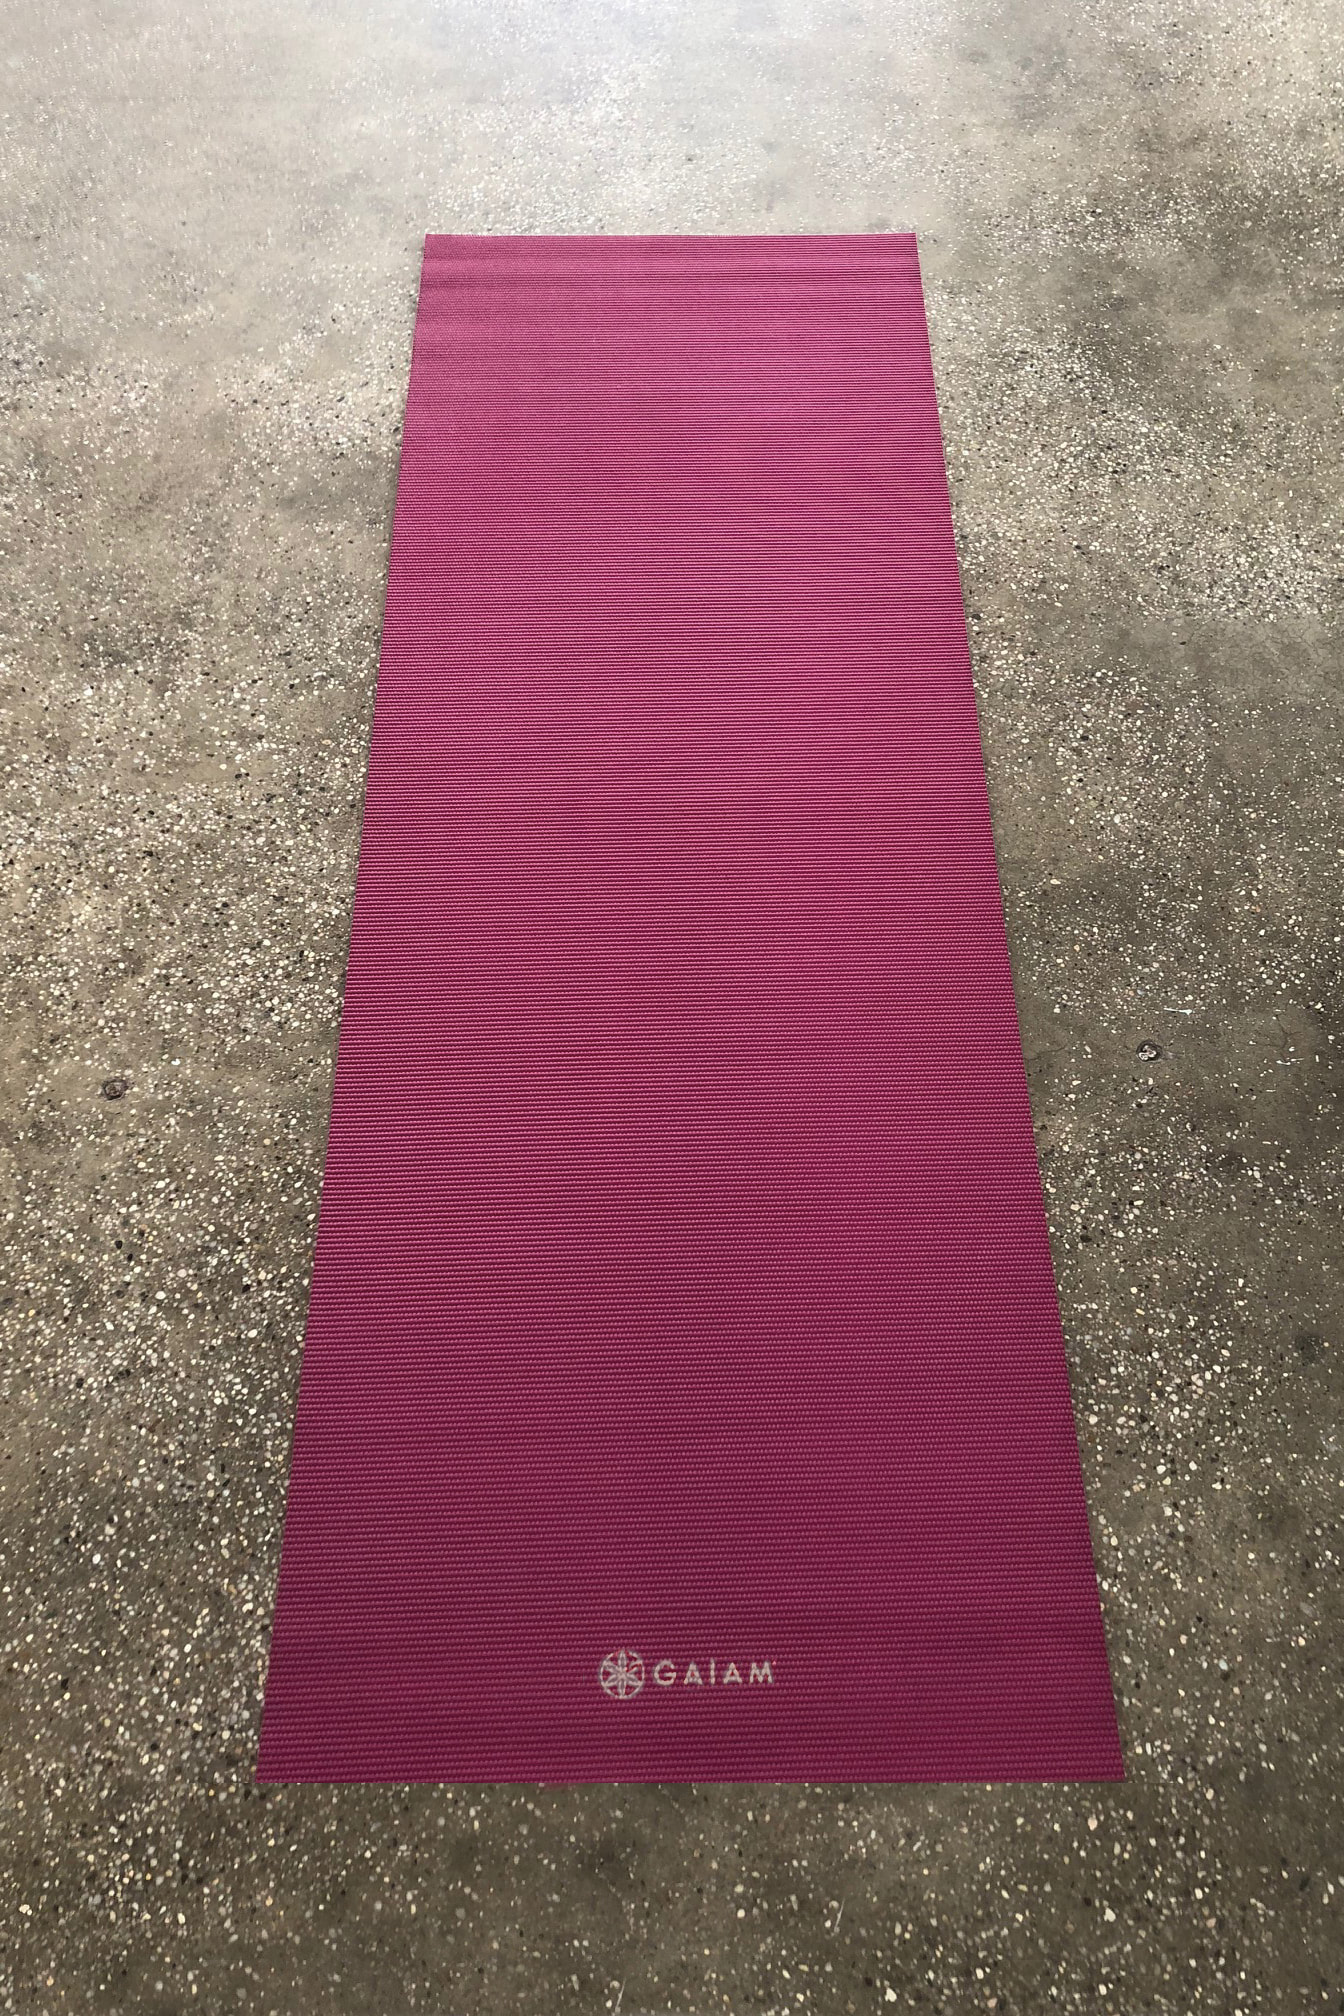 where can i buy a yoga mat in nyc